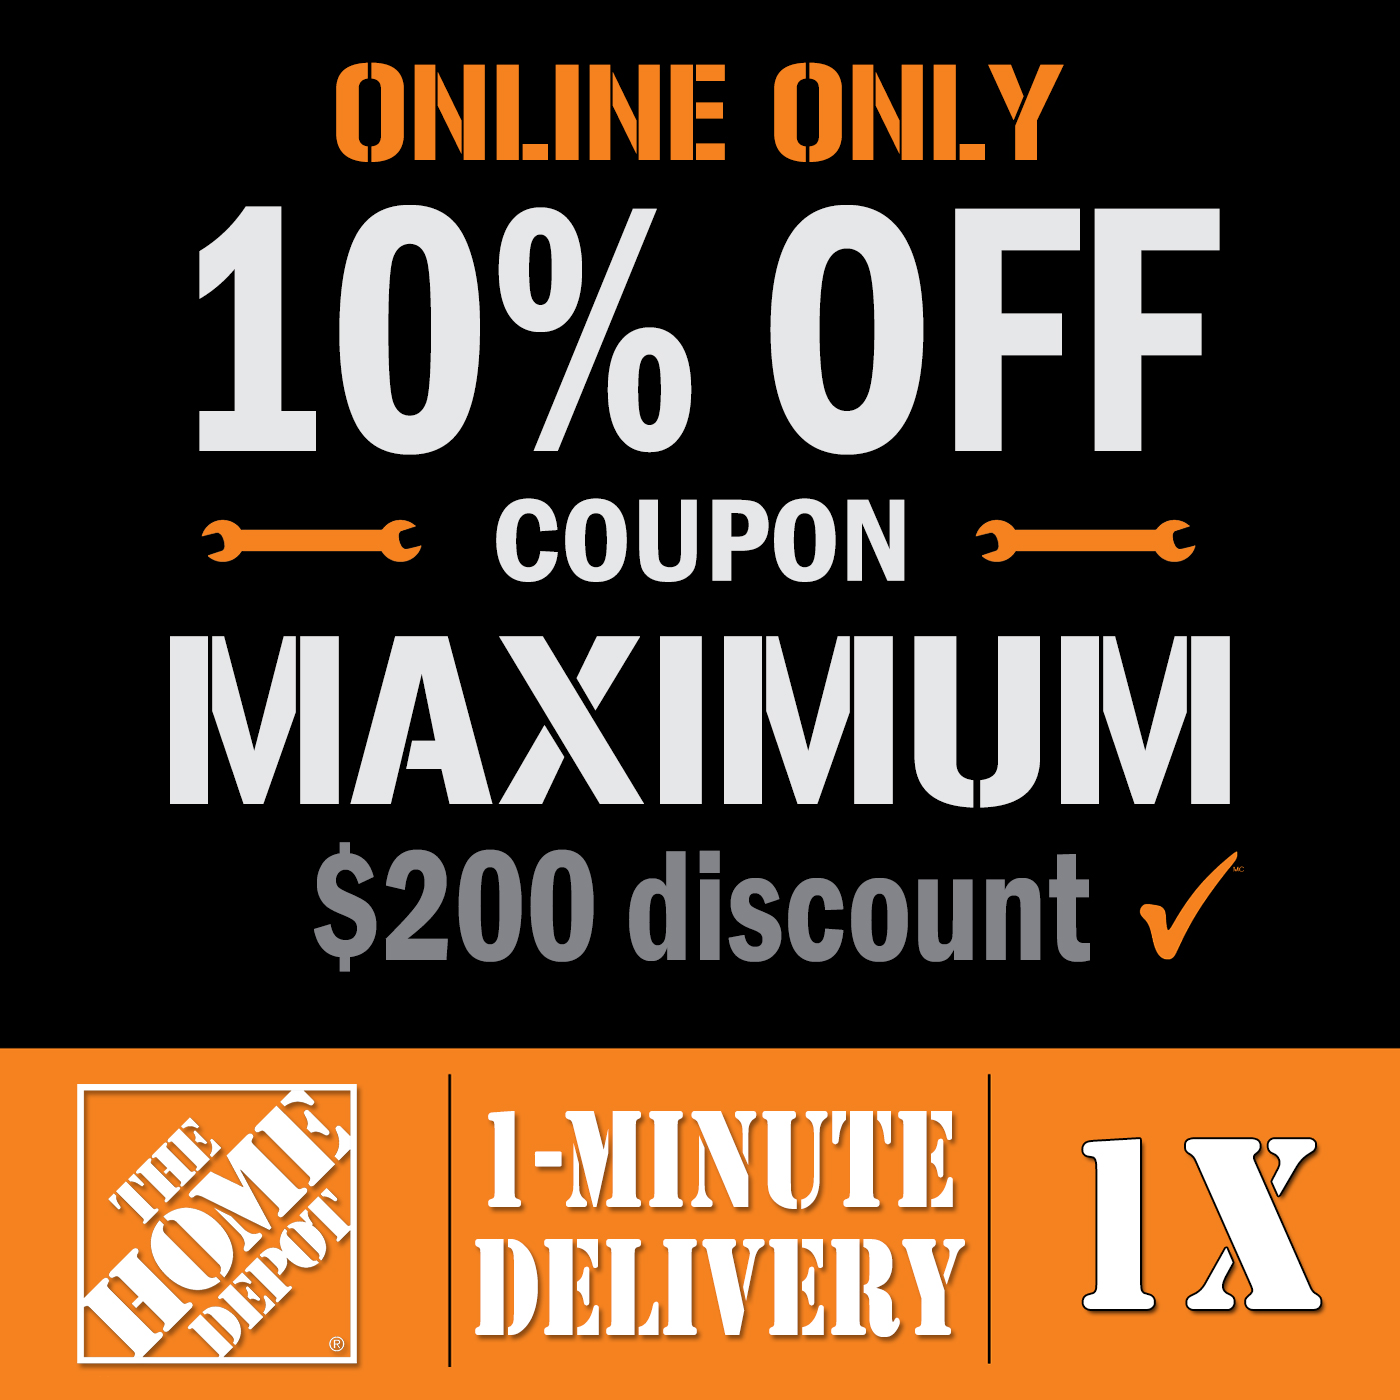 Home Depot Coupon Save 10% off online orders Instant Email Delivery